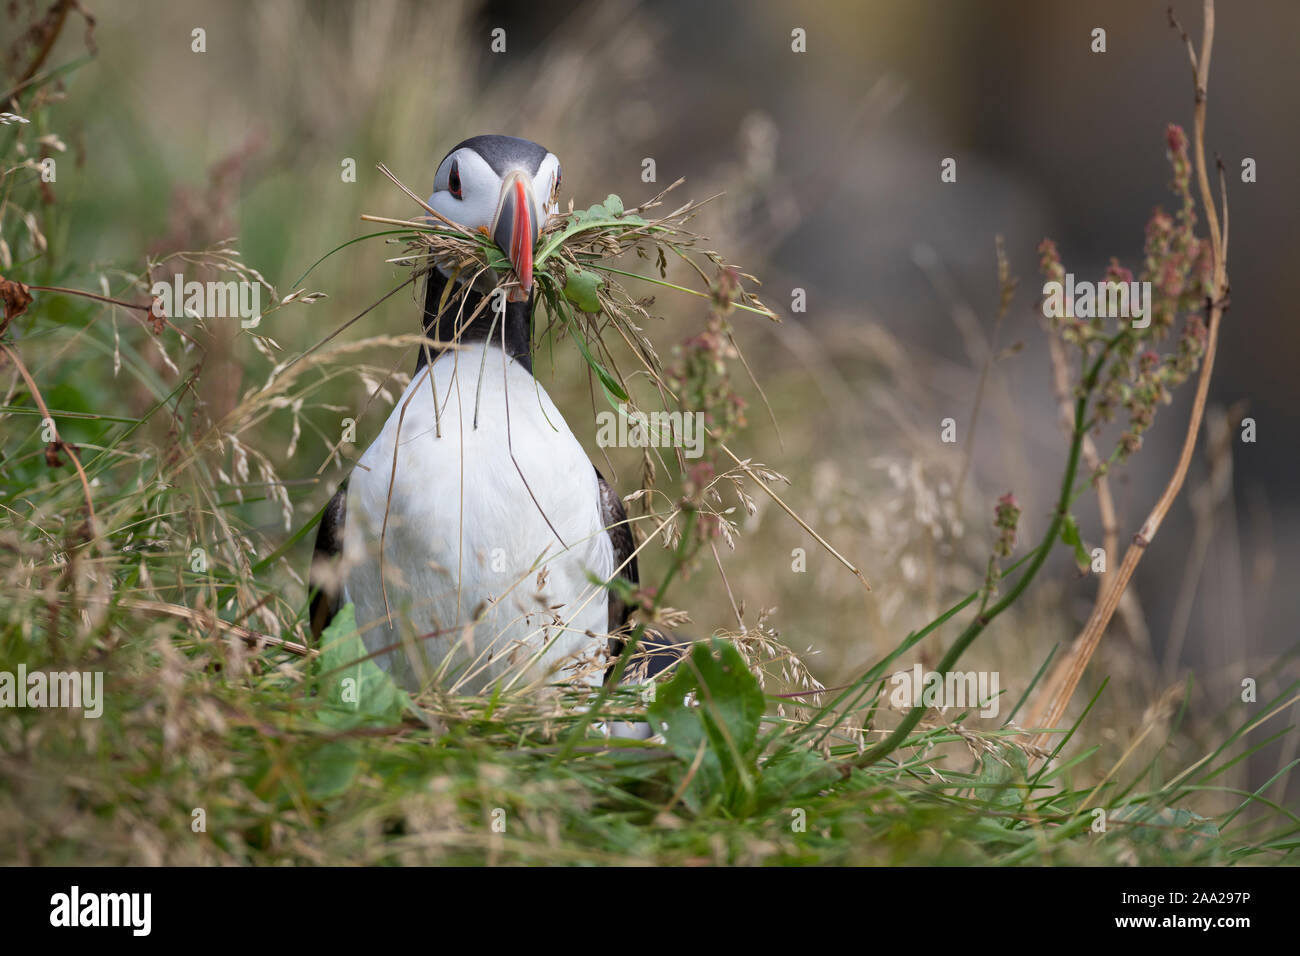 Papageitaucher, Papageientaucher, Papagei-Taucher, Fratercula arctica, Atlantic puffin, puffin, common puffin, Le Macareux moine, Vogelfels, Vogelfels Stock Photo